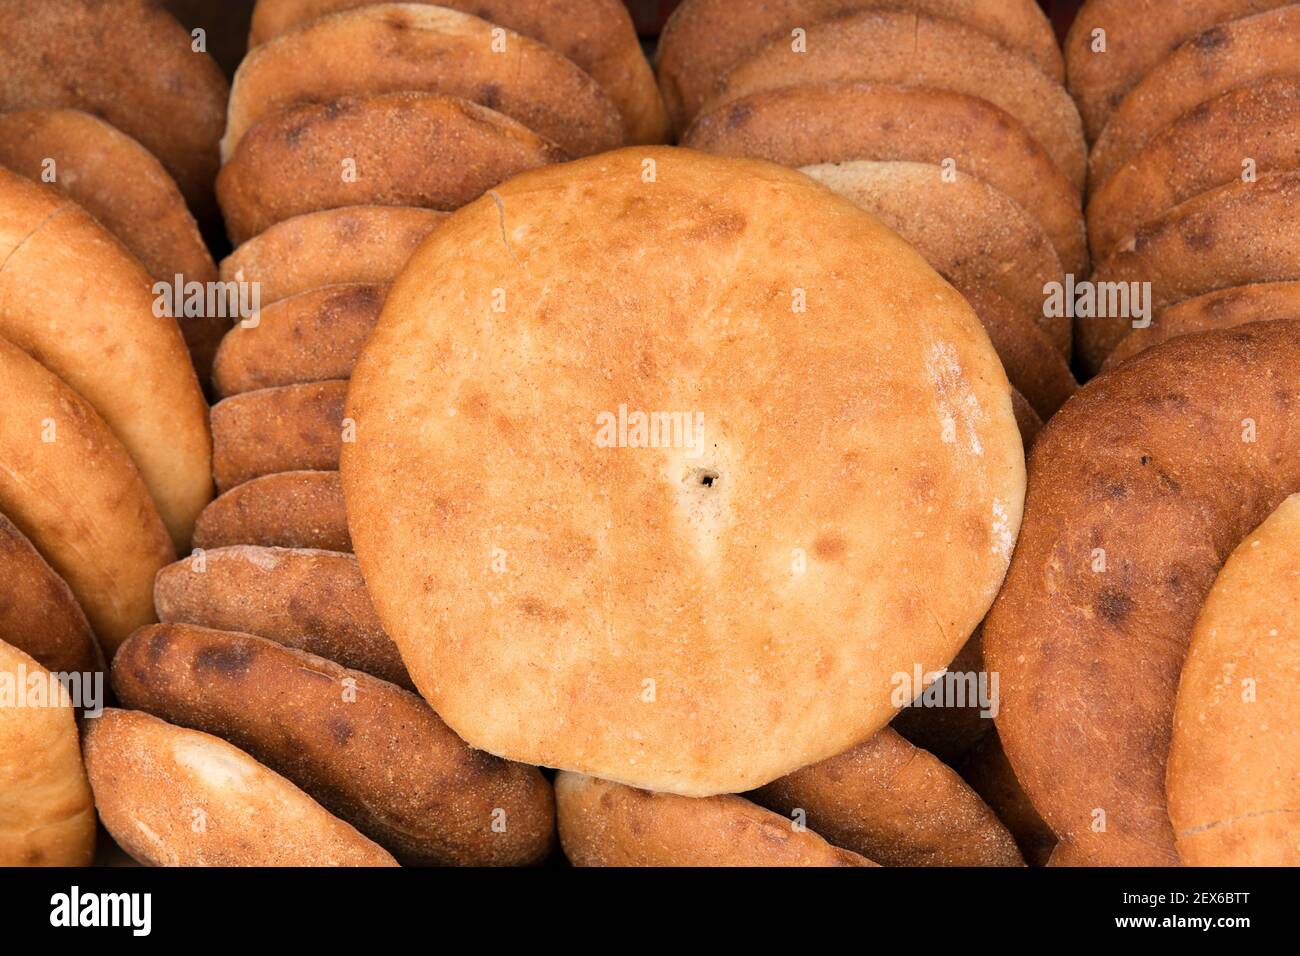 flat bread on sale at a market bakery Stock Photo